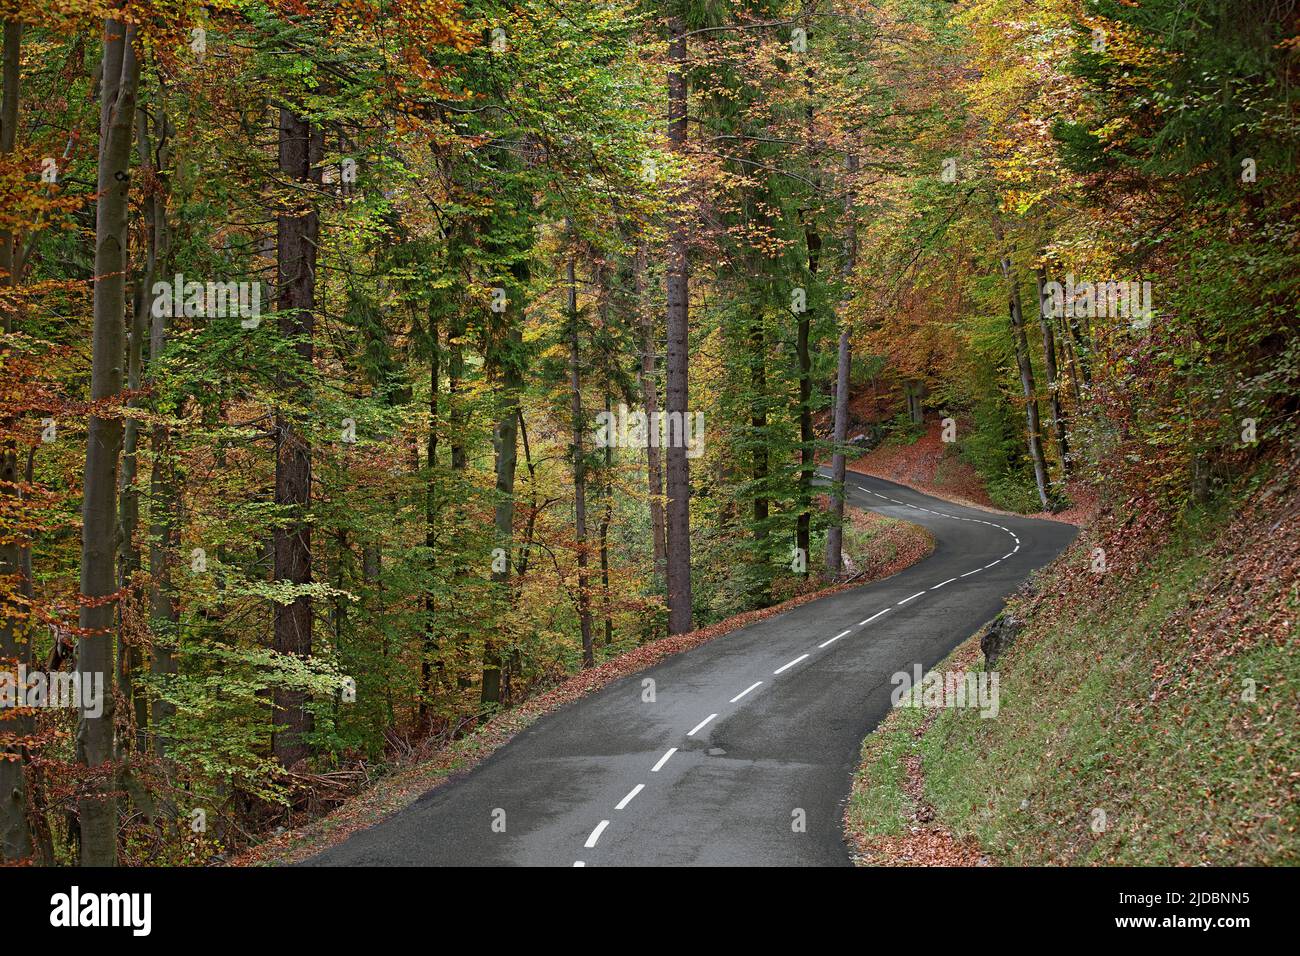 France, Haute-Savoie road with bend in forest in autumn Stock Photo